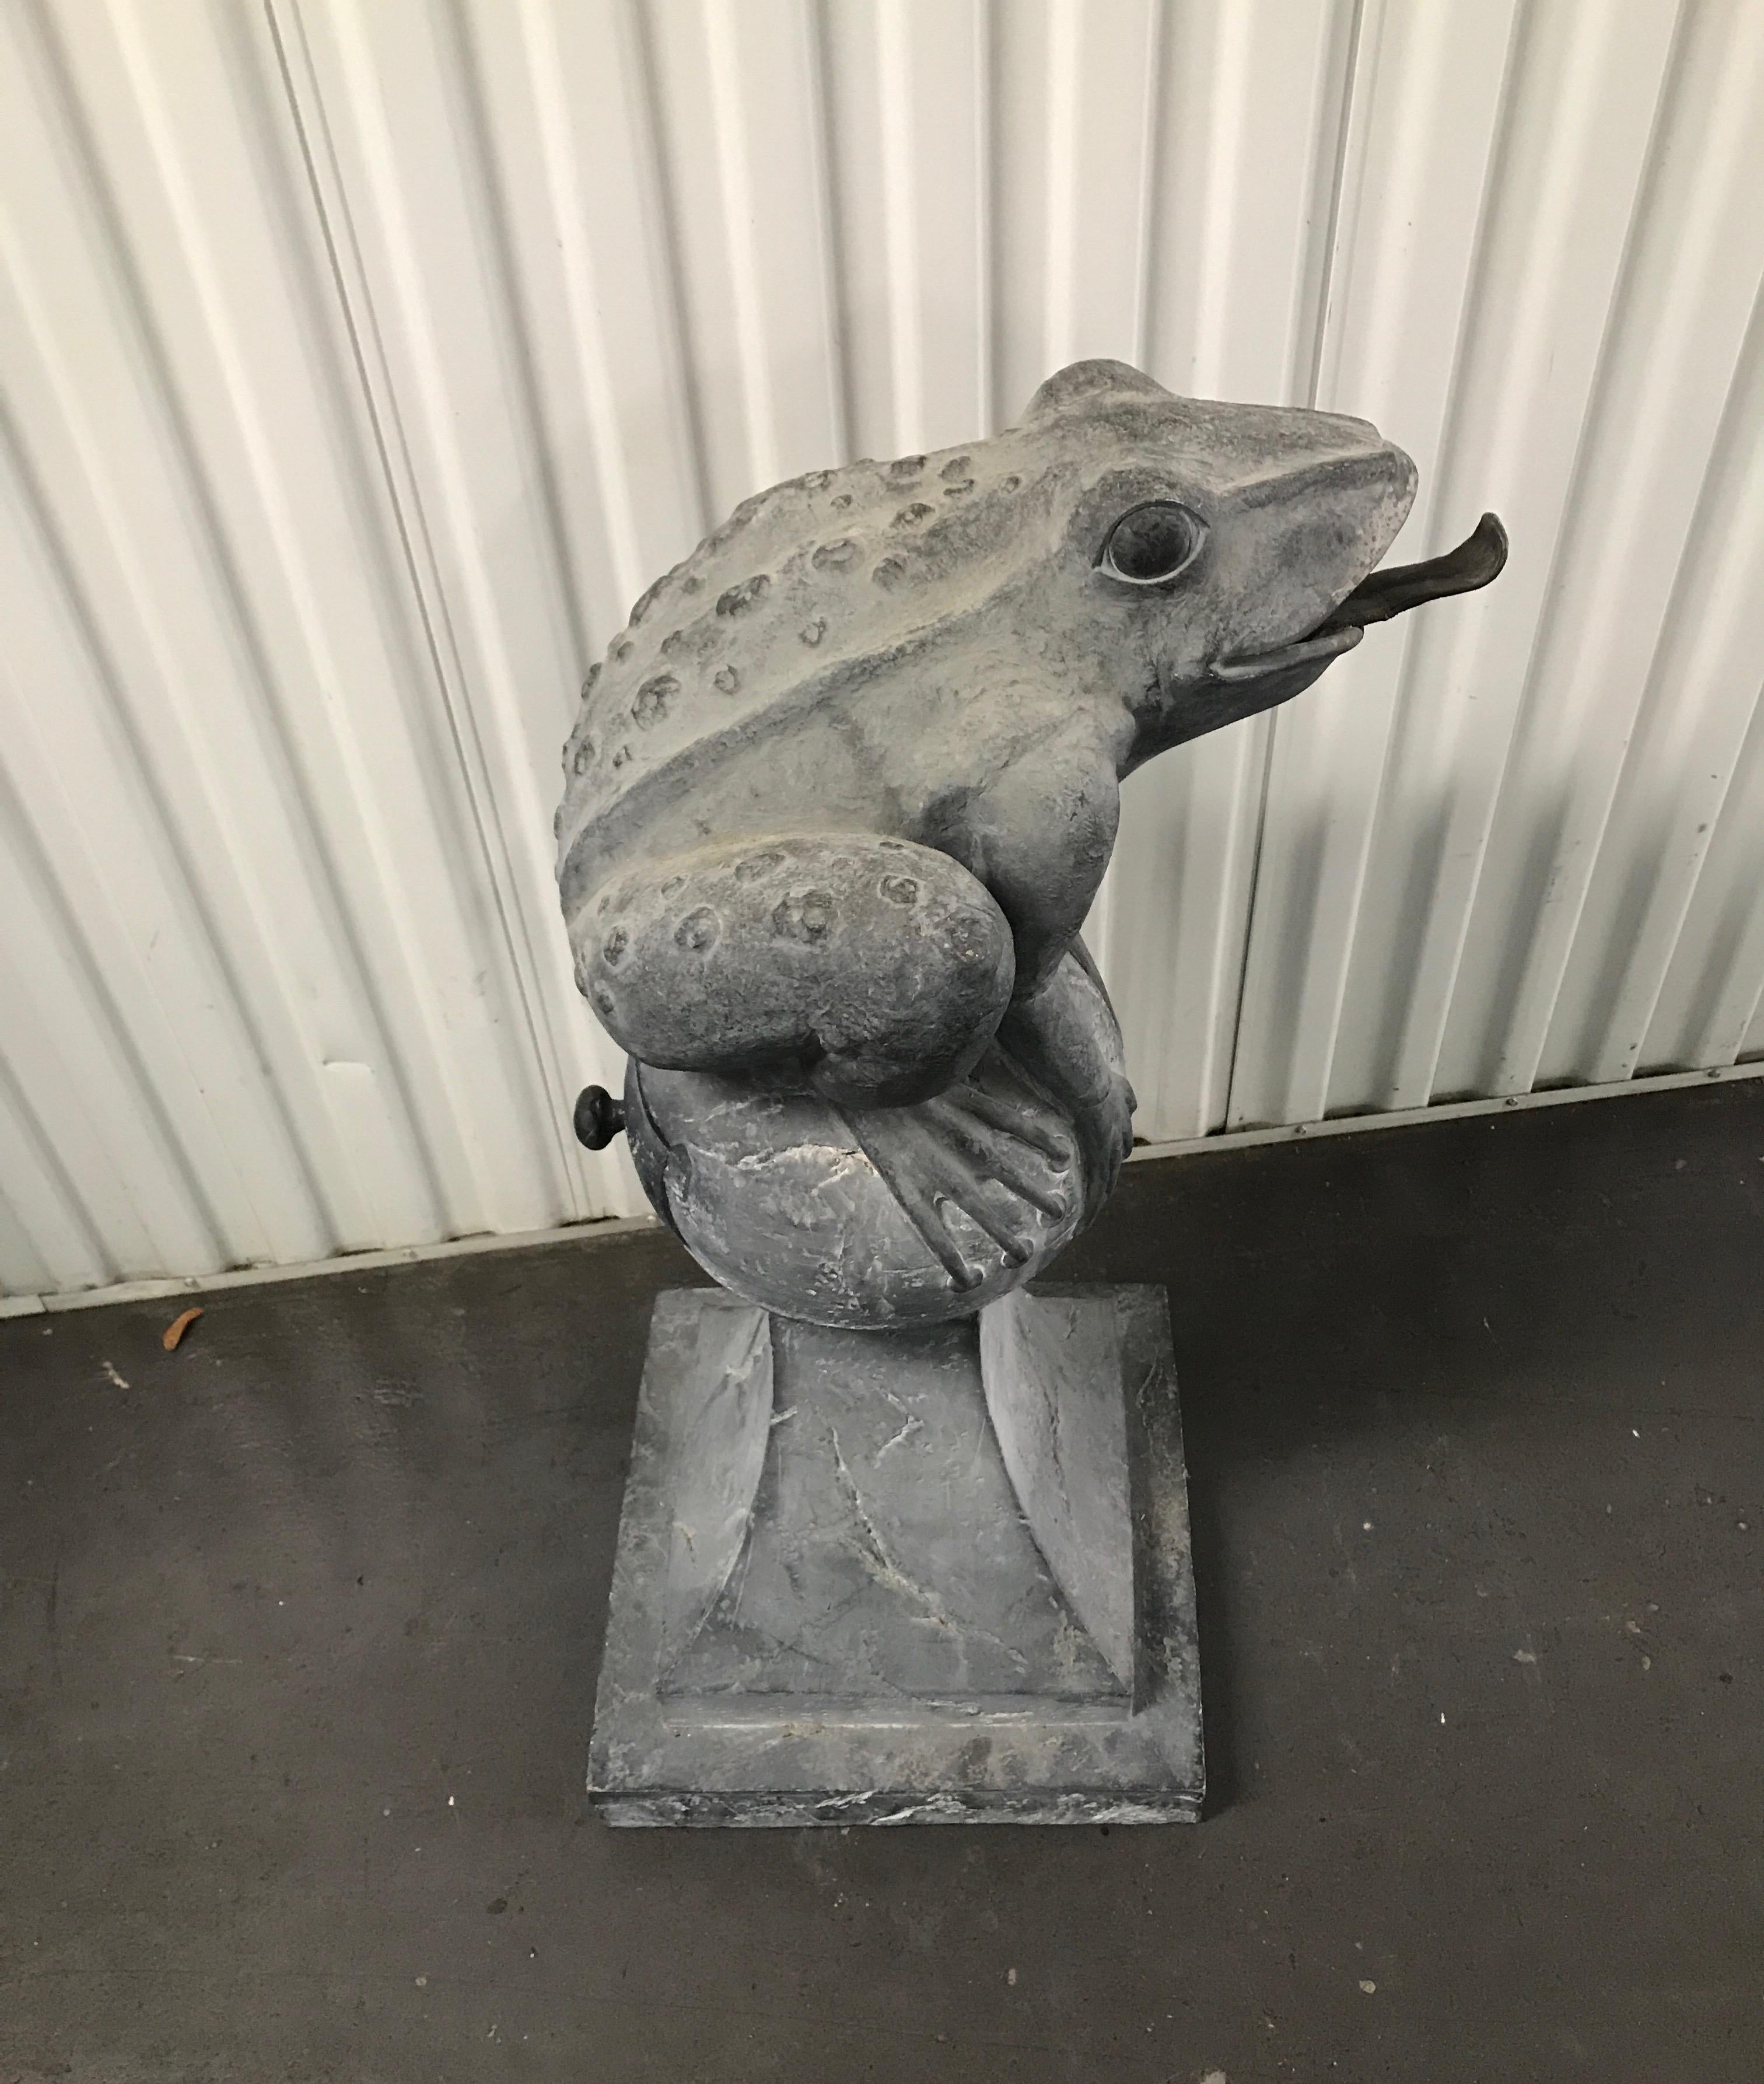 20th Century Whimsical Large Jumping Frog Sculpture